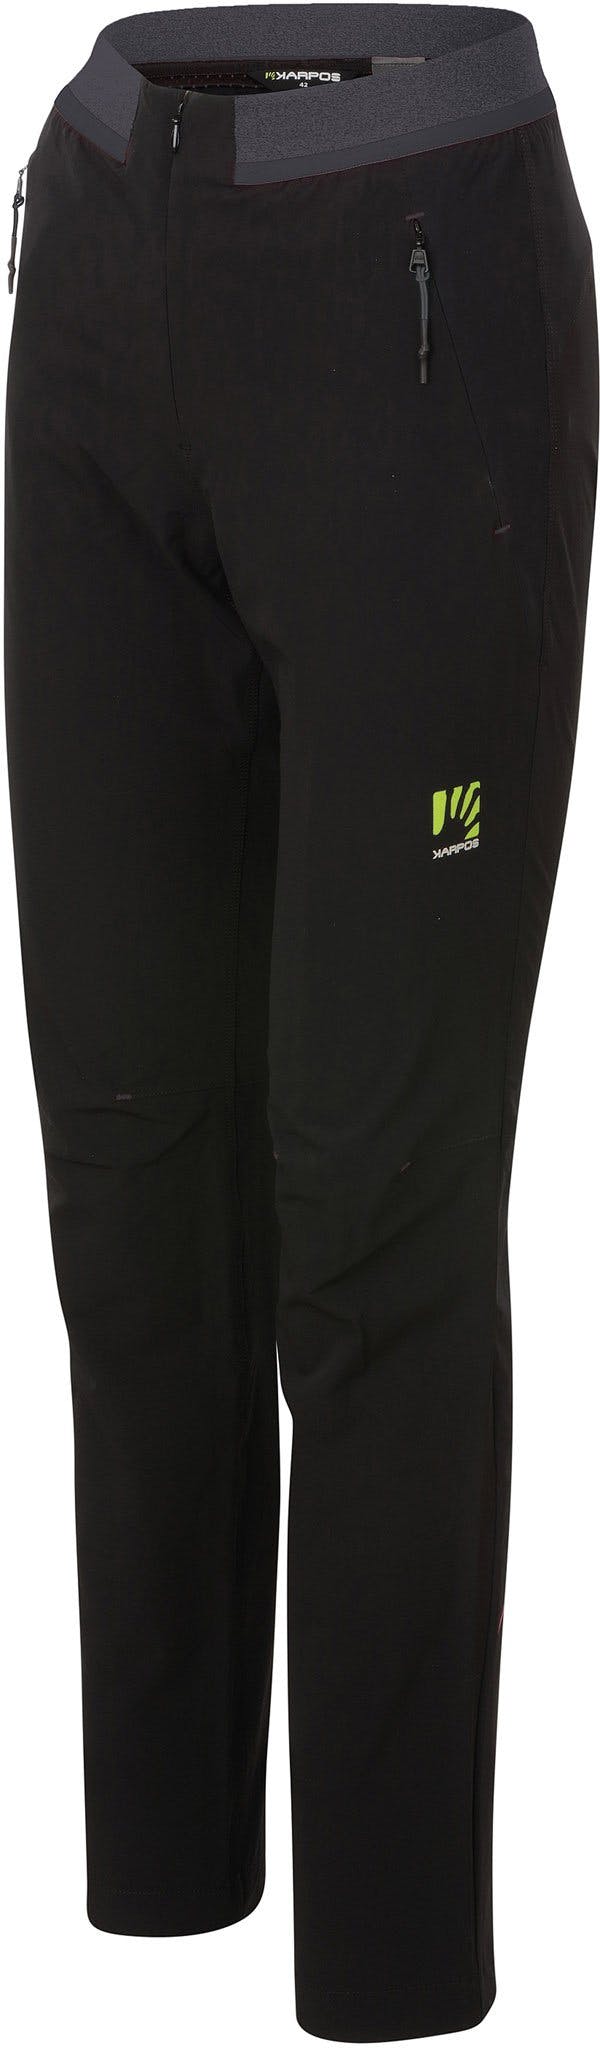 Product image for Tre Cime Pant - Women's